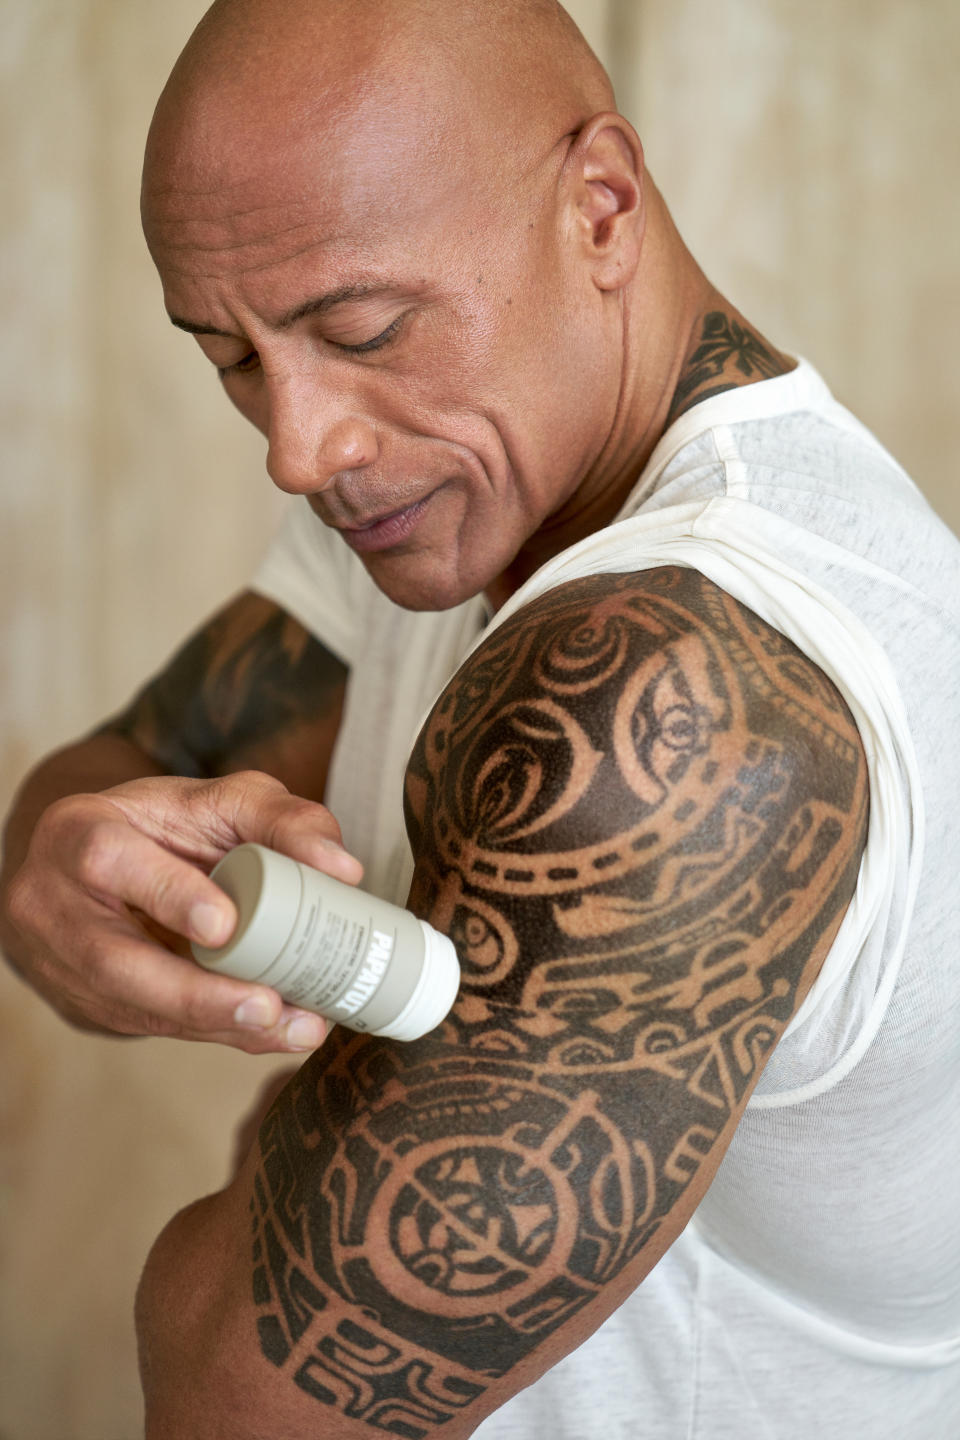 Dwayne “The Rock” Johnson’s line includes an Enhancing Tattoo Stick, made with mango butter and coconut oil “to add shine, pop and hydrate the skin,” he said.